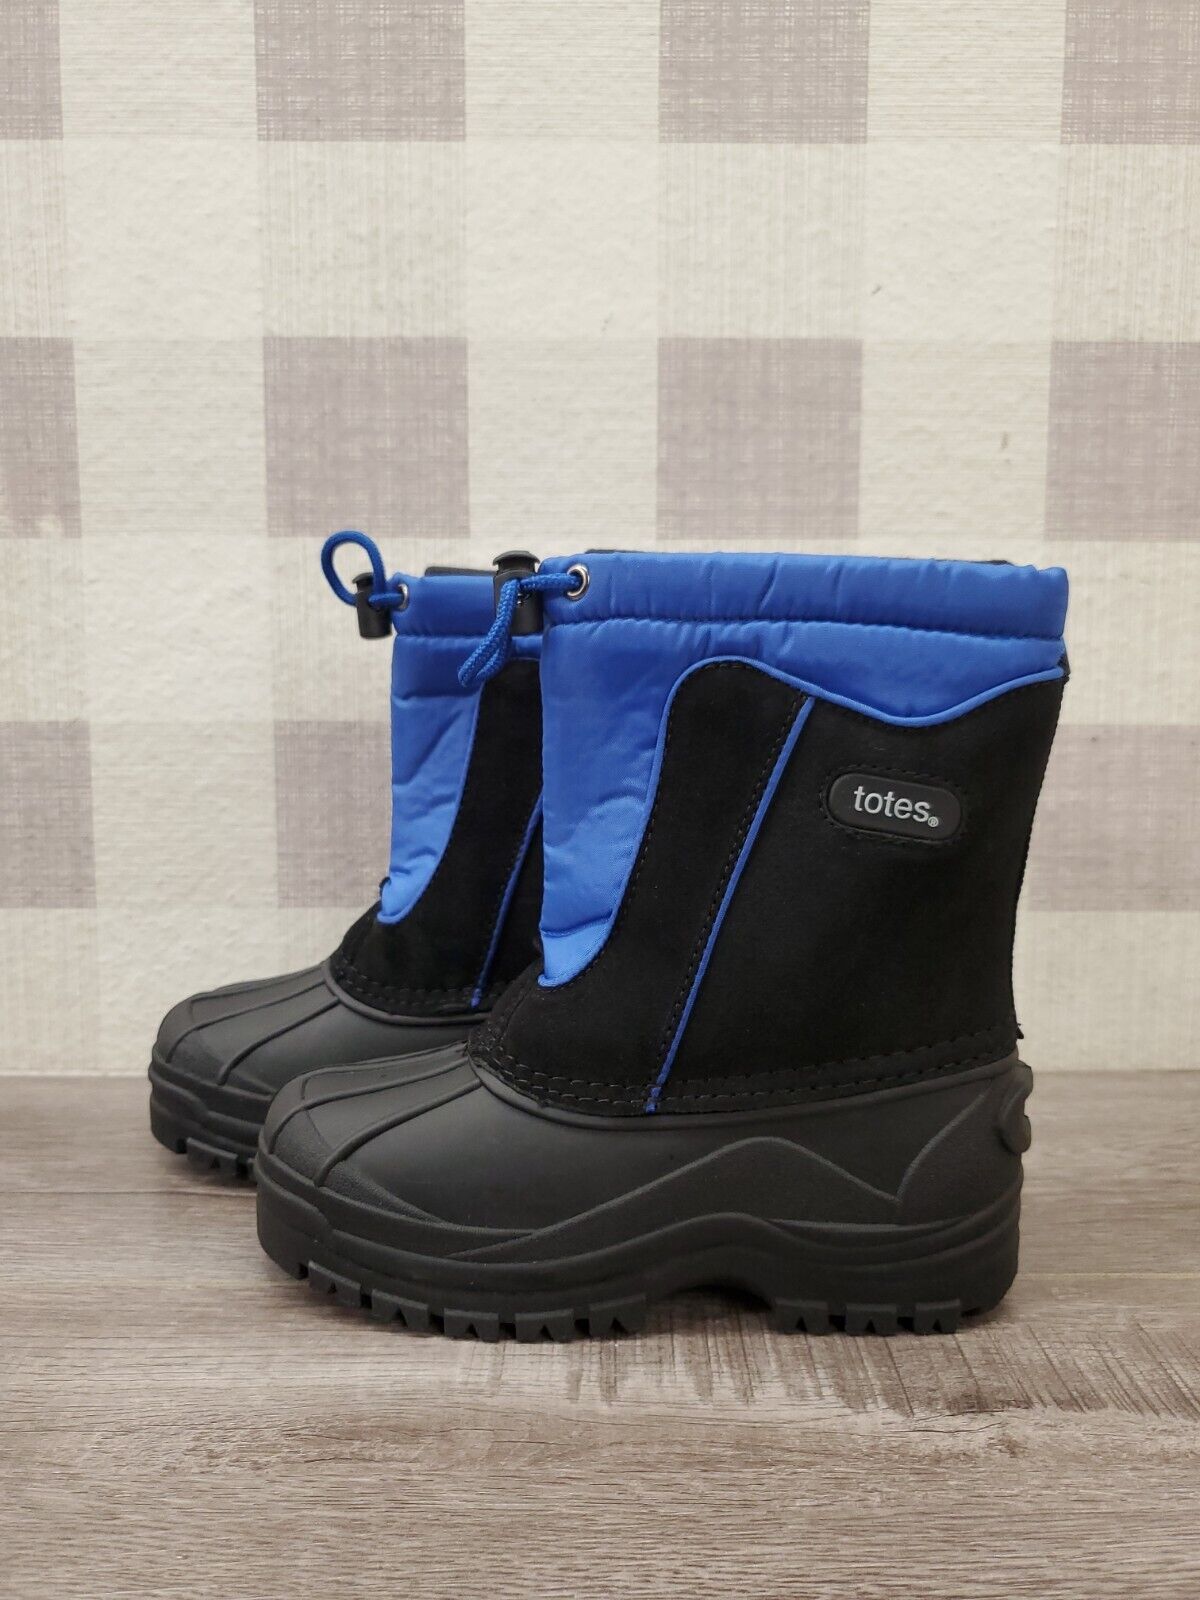 Totes Kids Action Insulated Snow Boots Size 2 Black/Blue - New ✅